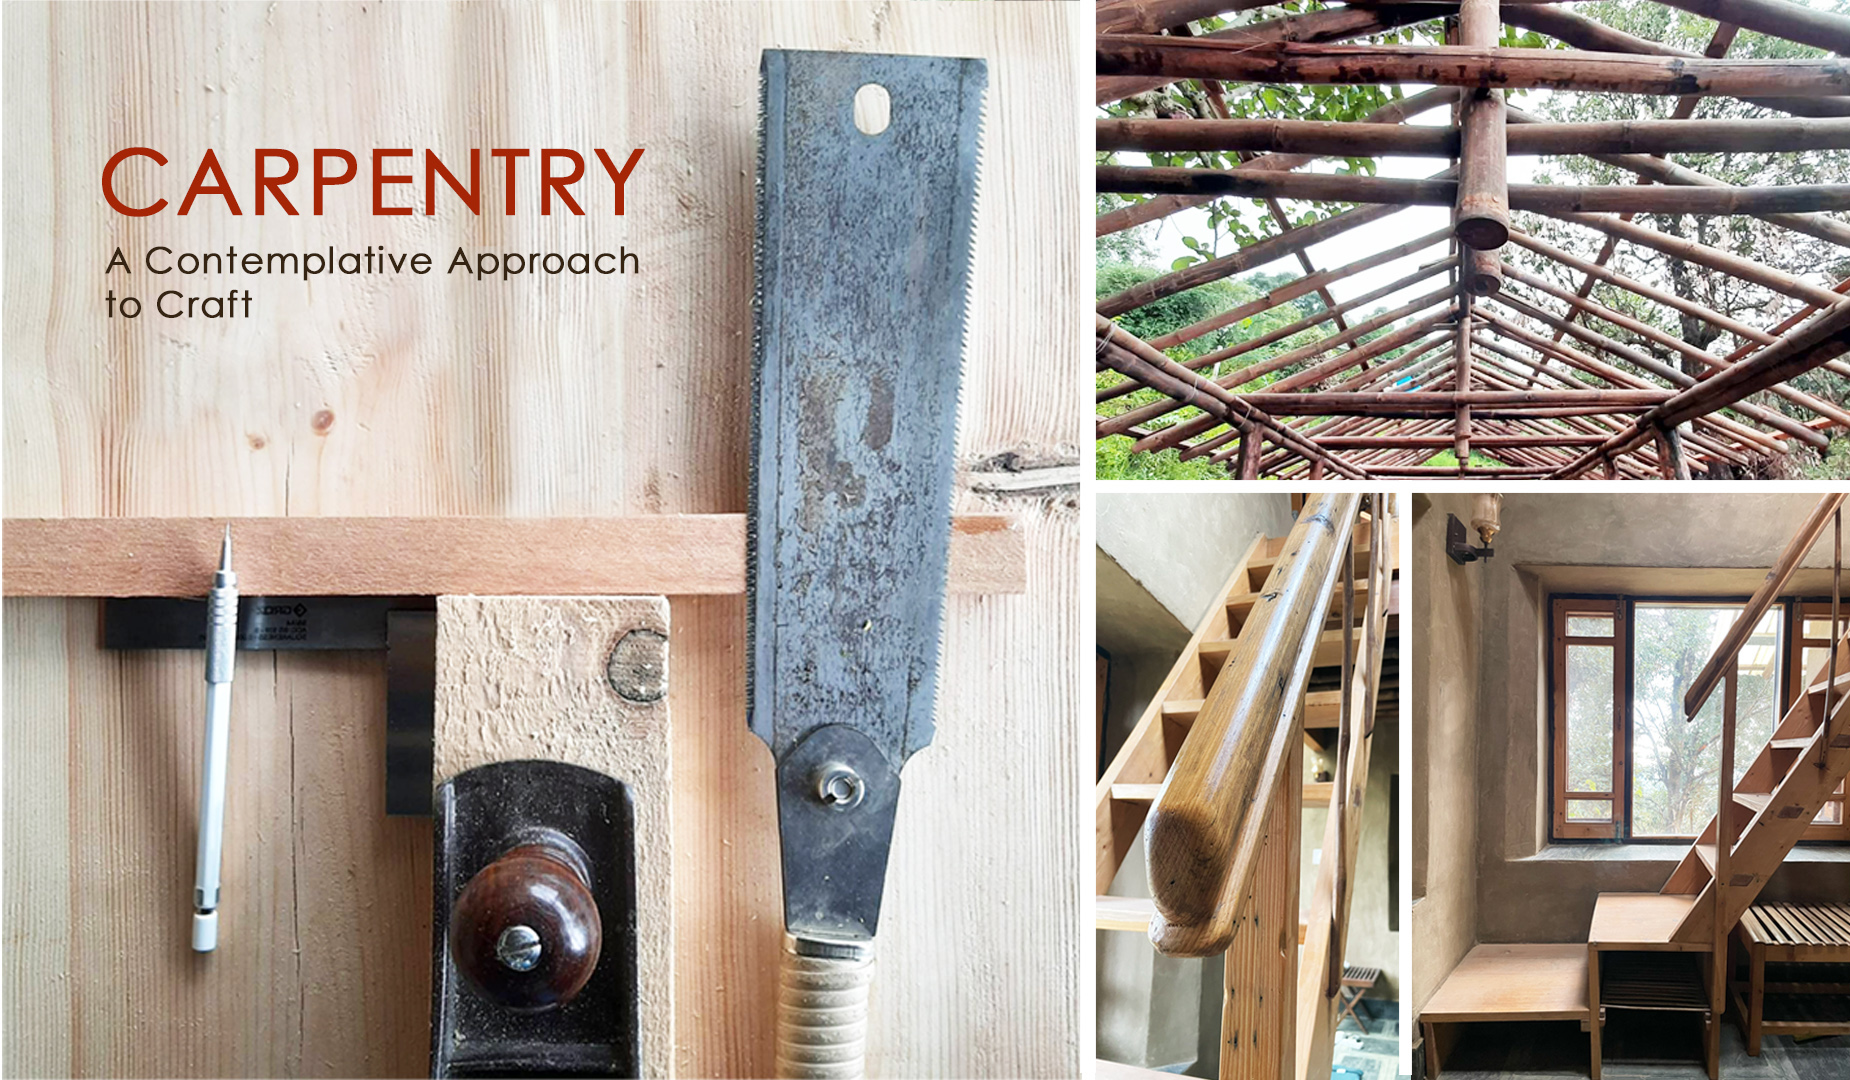 Carpentry: A Contemplative Approach to Craft